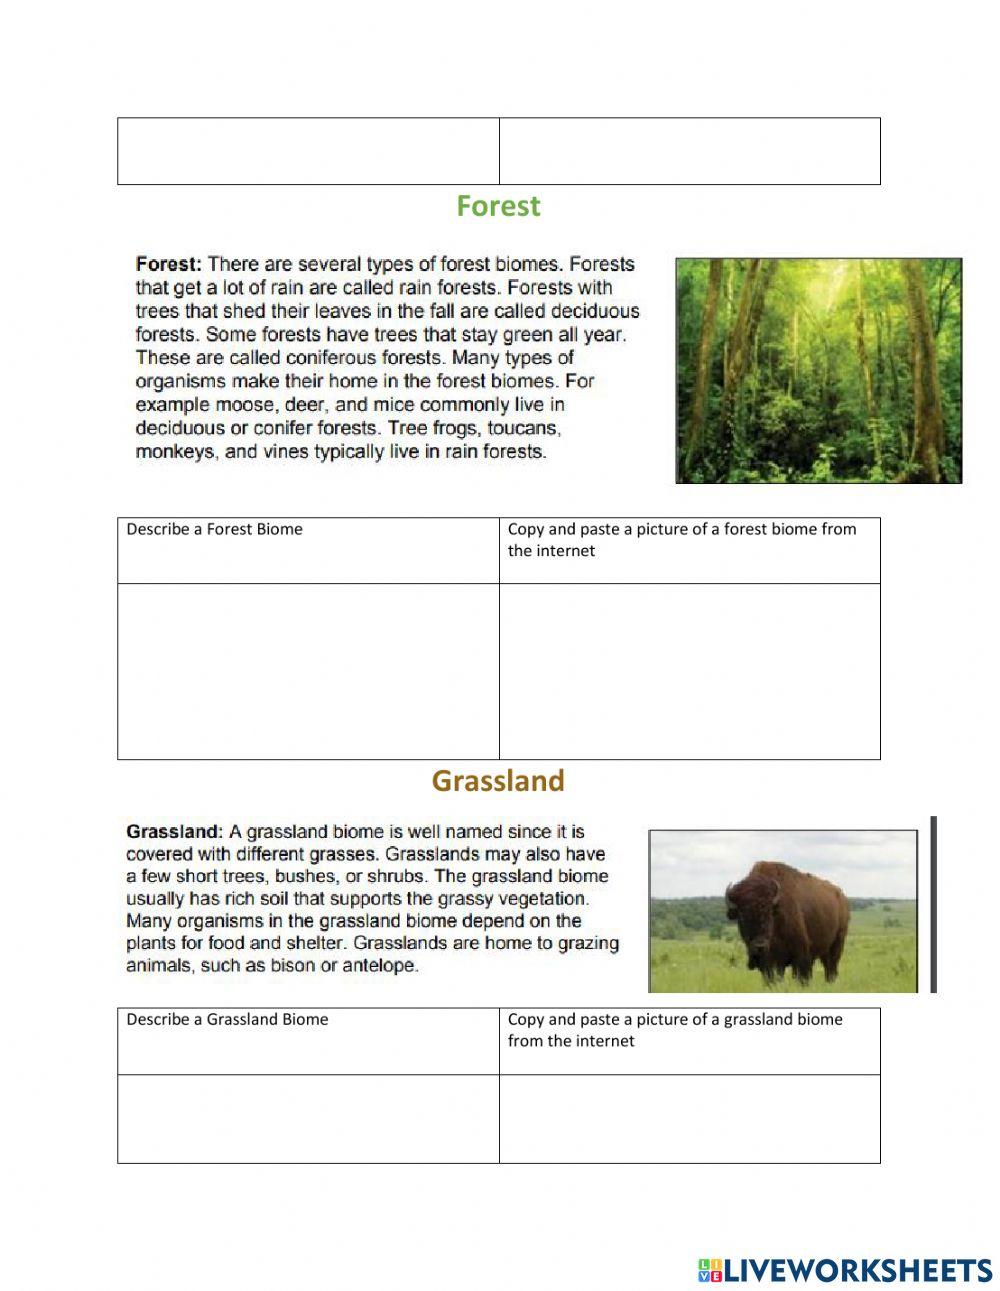 Sept 29-30 All about Biomes Stations